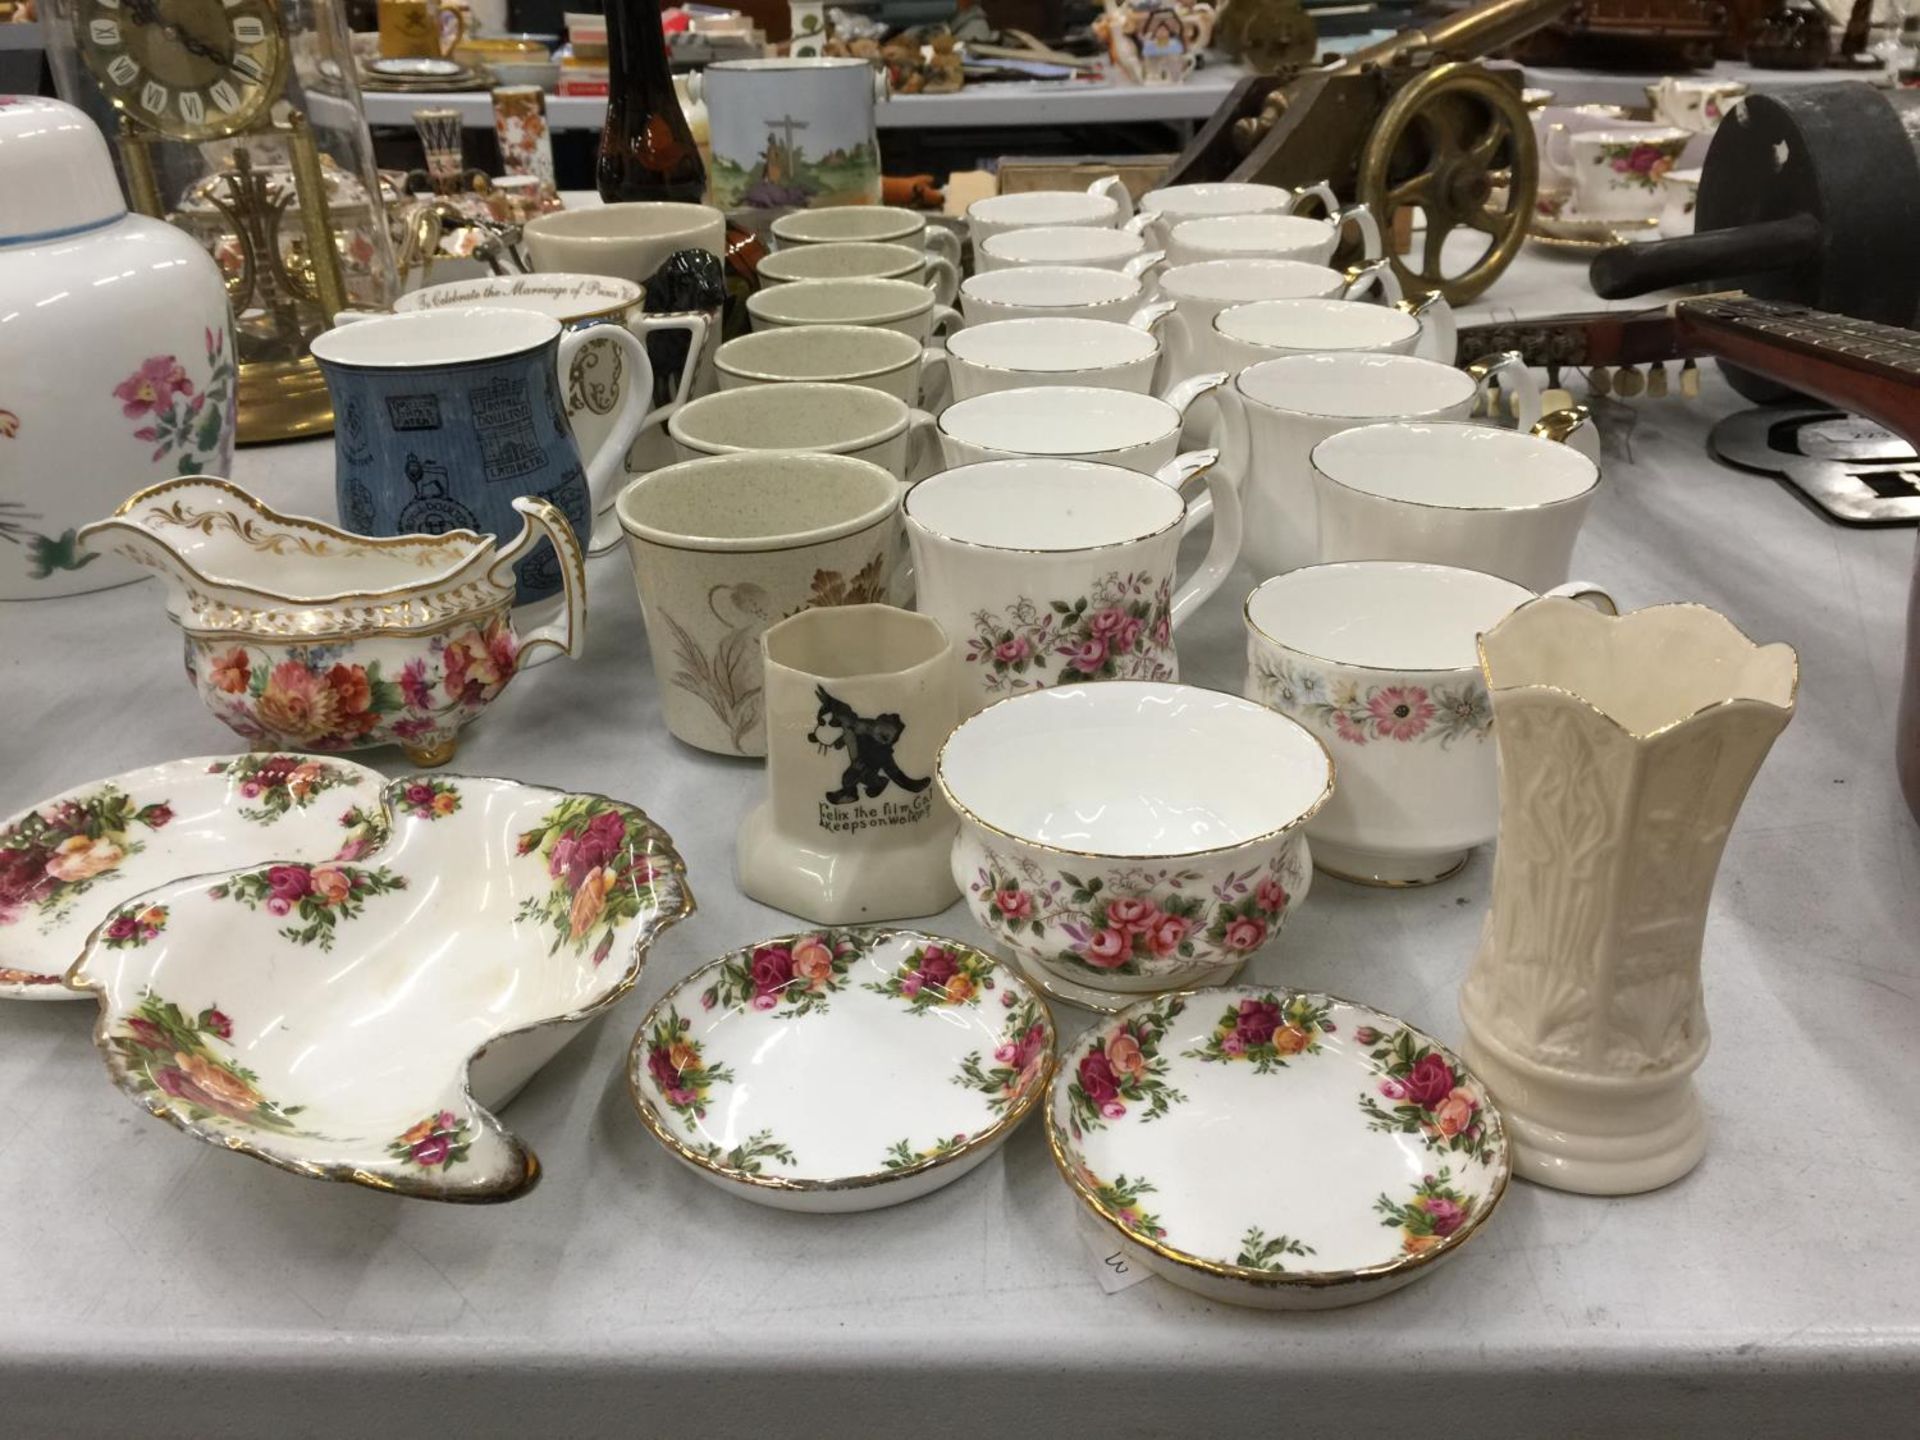 A QUANTITY OF MUGS AND CUPS TO INCLUDE ROYAL ALBERT 'LAVENDER ROSE', 'VAL D'OR', 'OLD COUNTRY